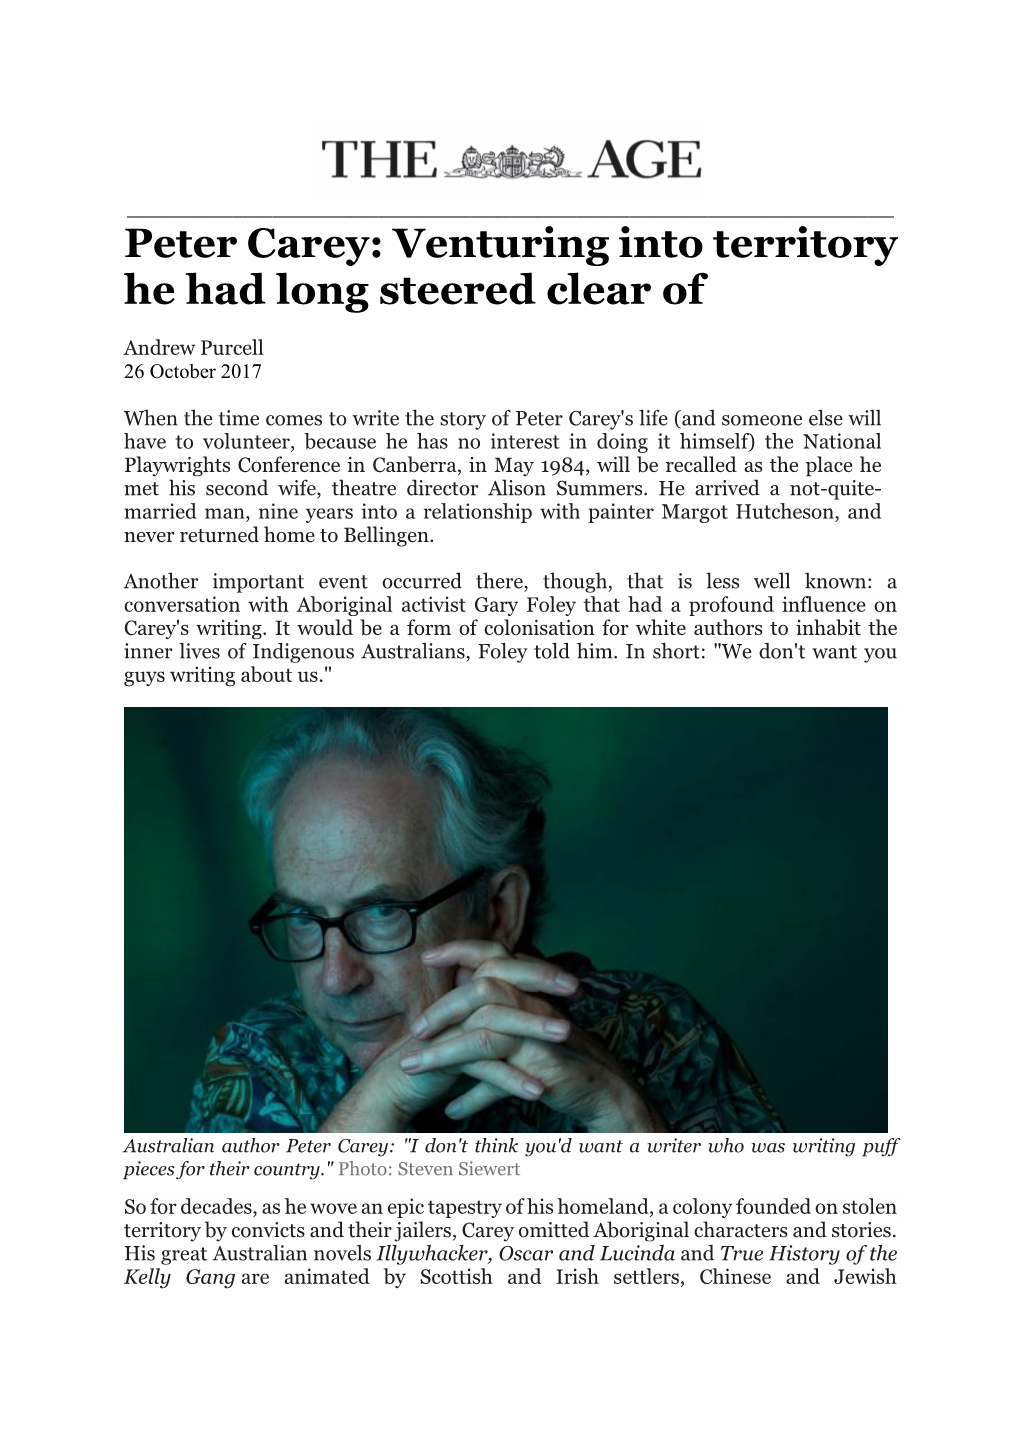 Peter Carey: Venturing Into Territory He Had Long Steered Clear Of